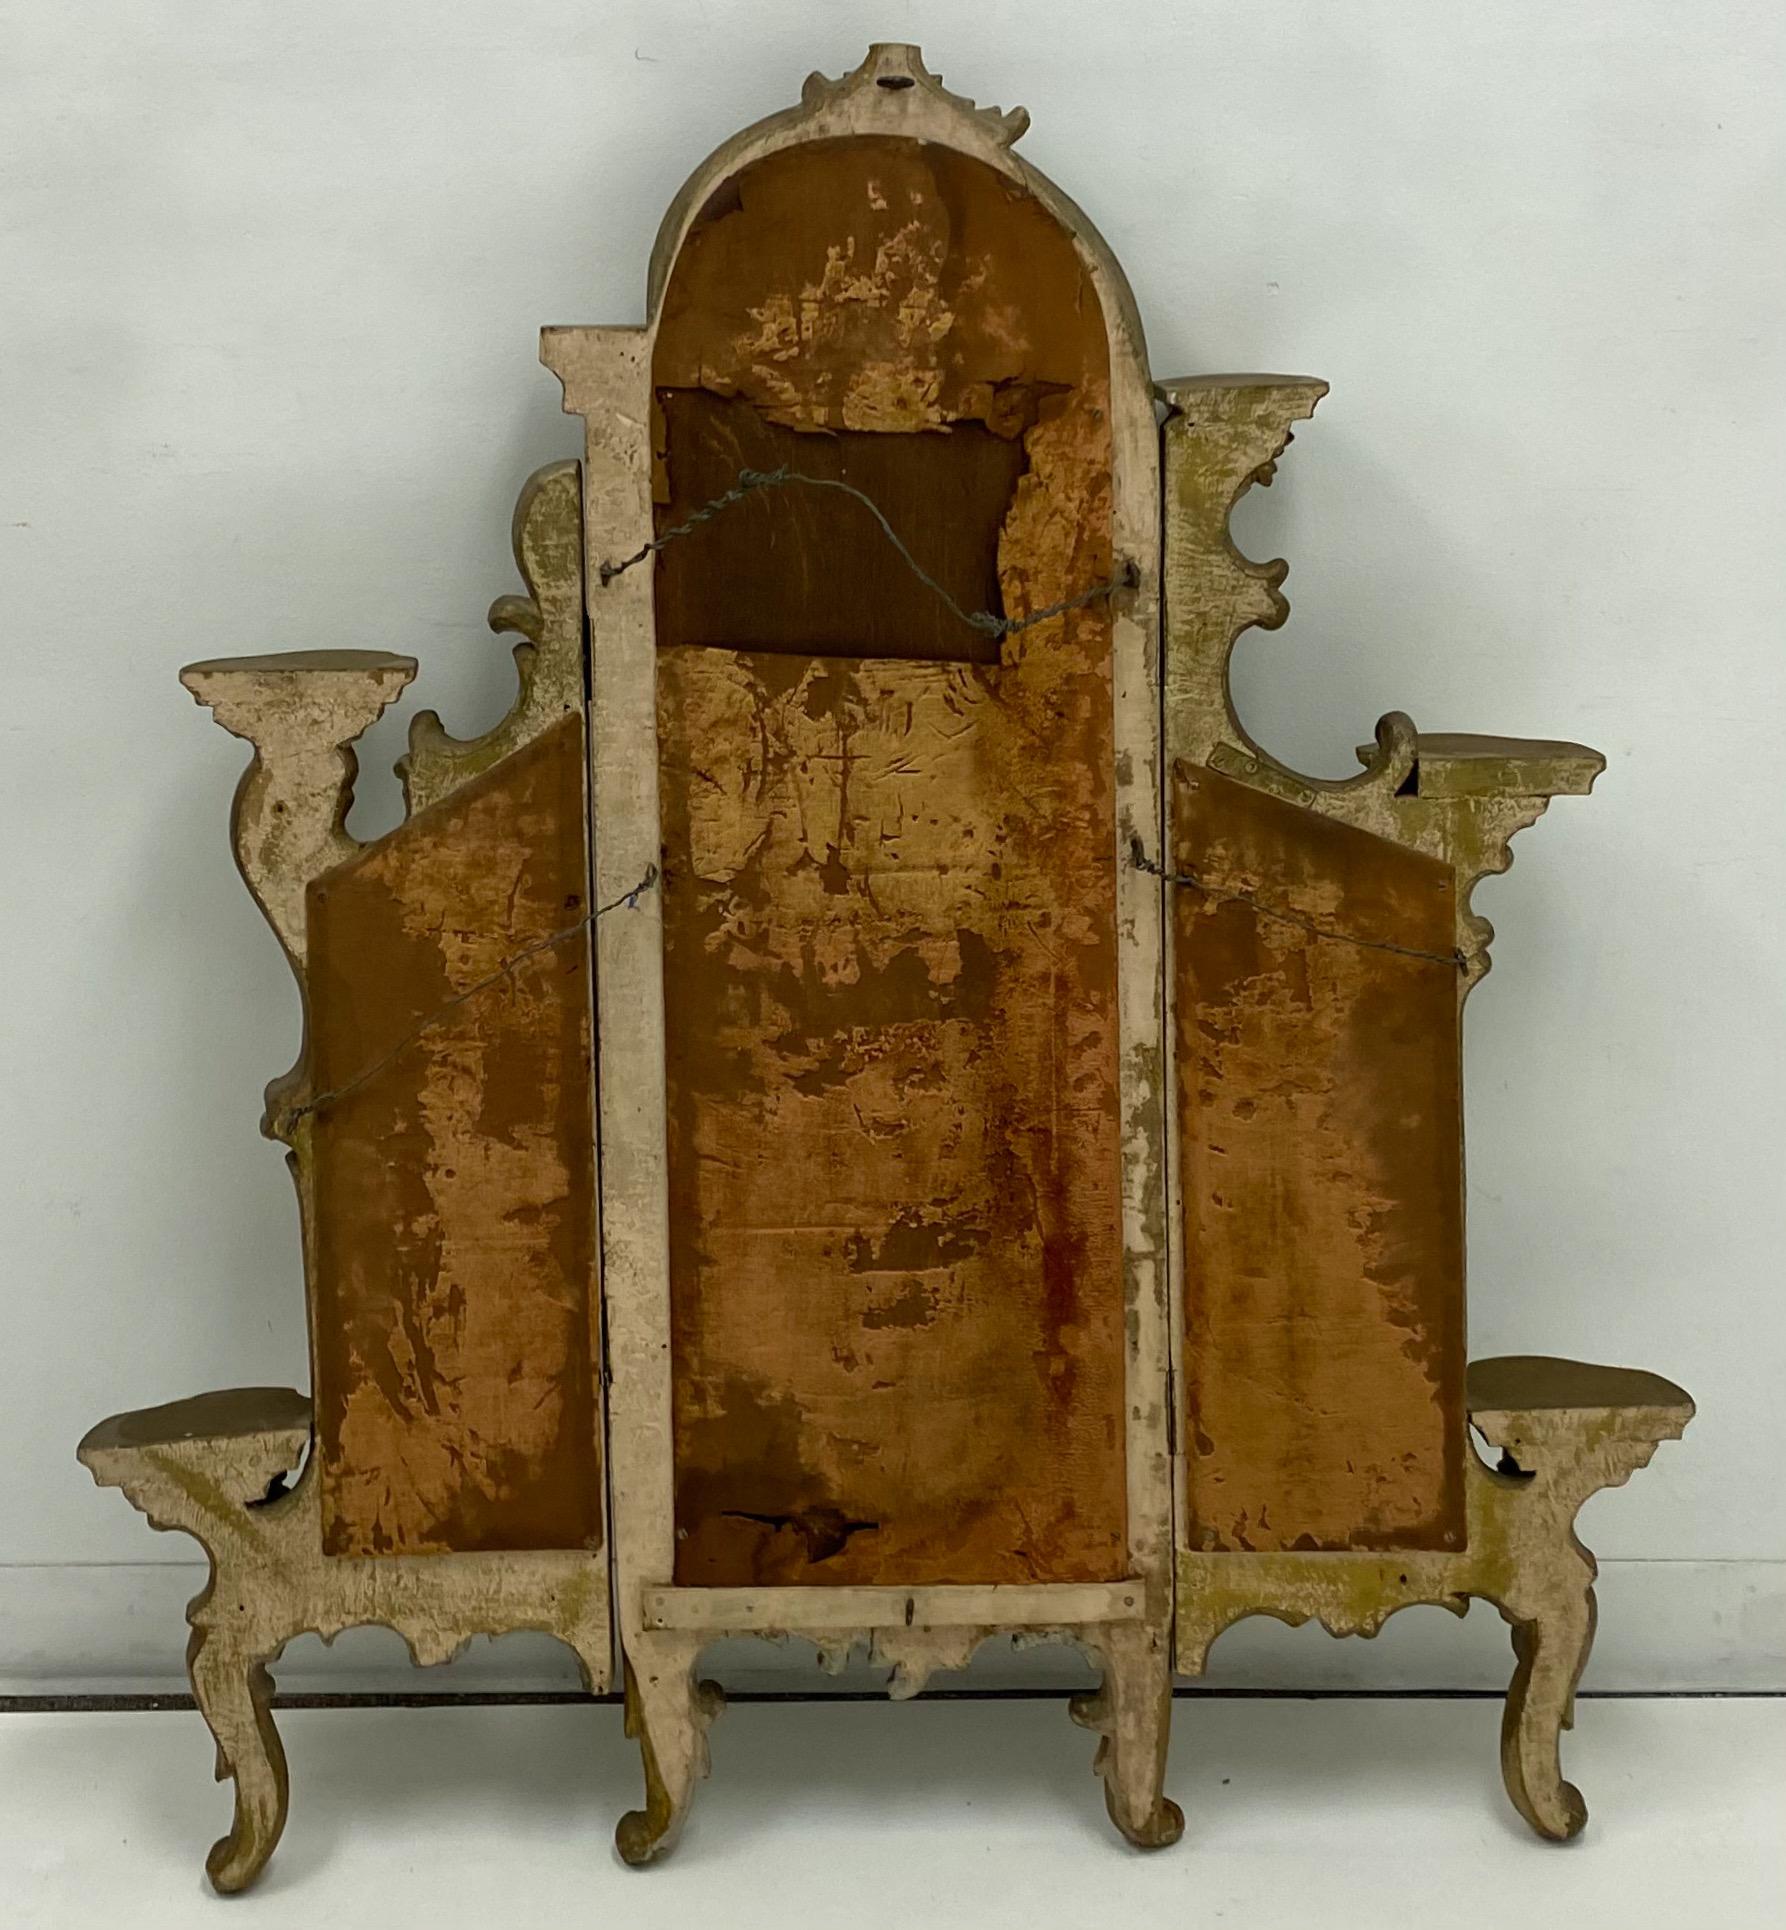 Love this! This is a 19th century French carved giltwood triptych form mirror. Although adapted to be wall mounted, at one point, it was more than likely stood on a commode. The mirror has eight petite shelves framing the mirror portion. It is